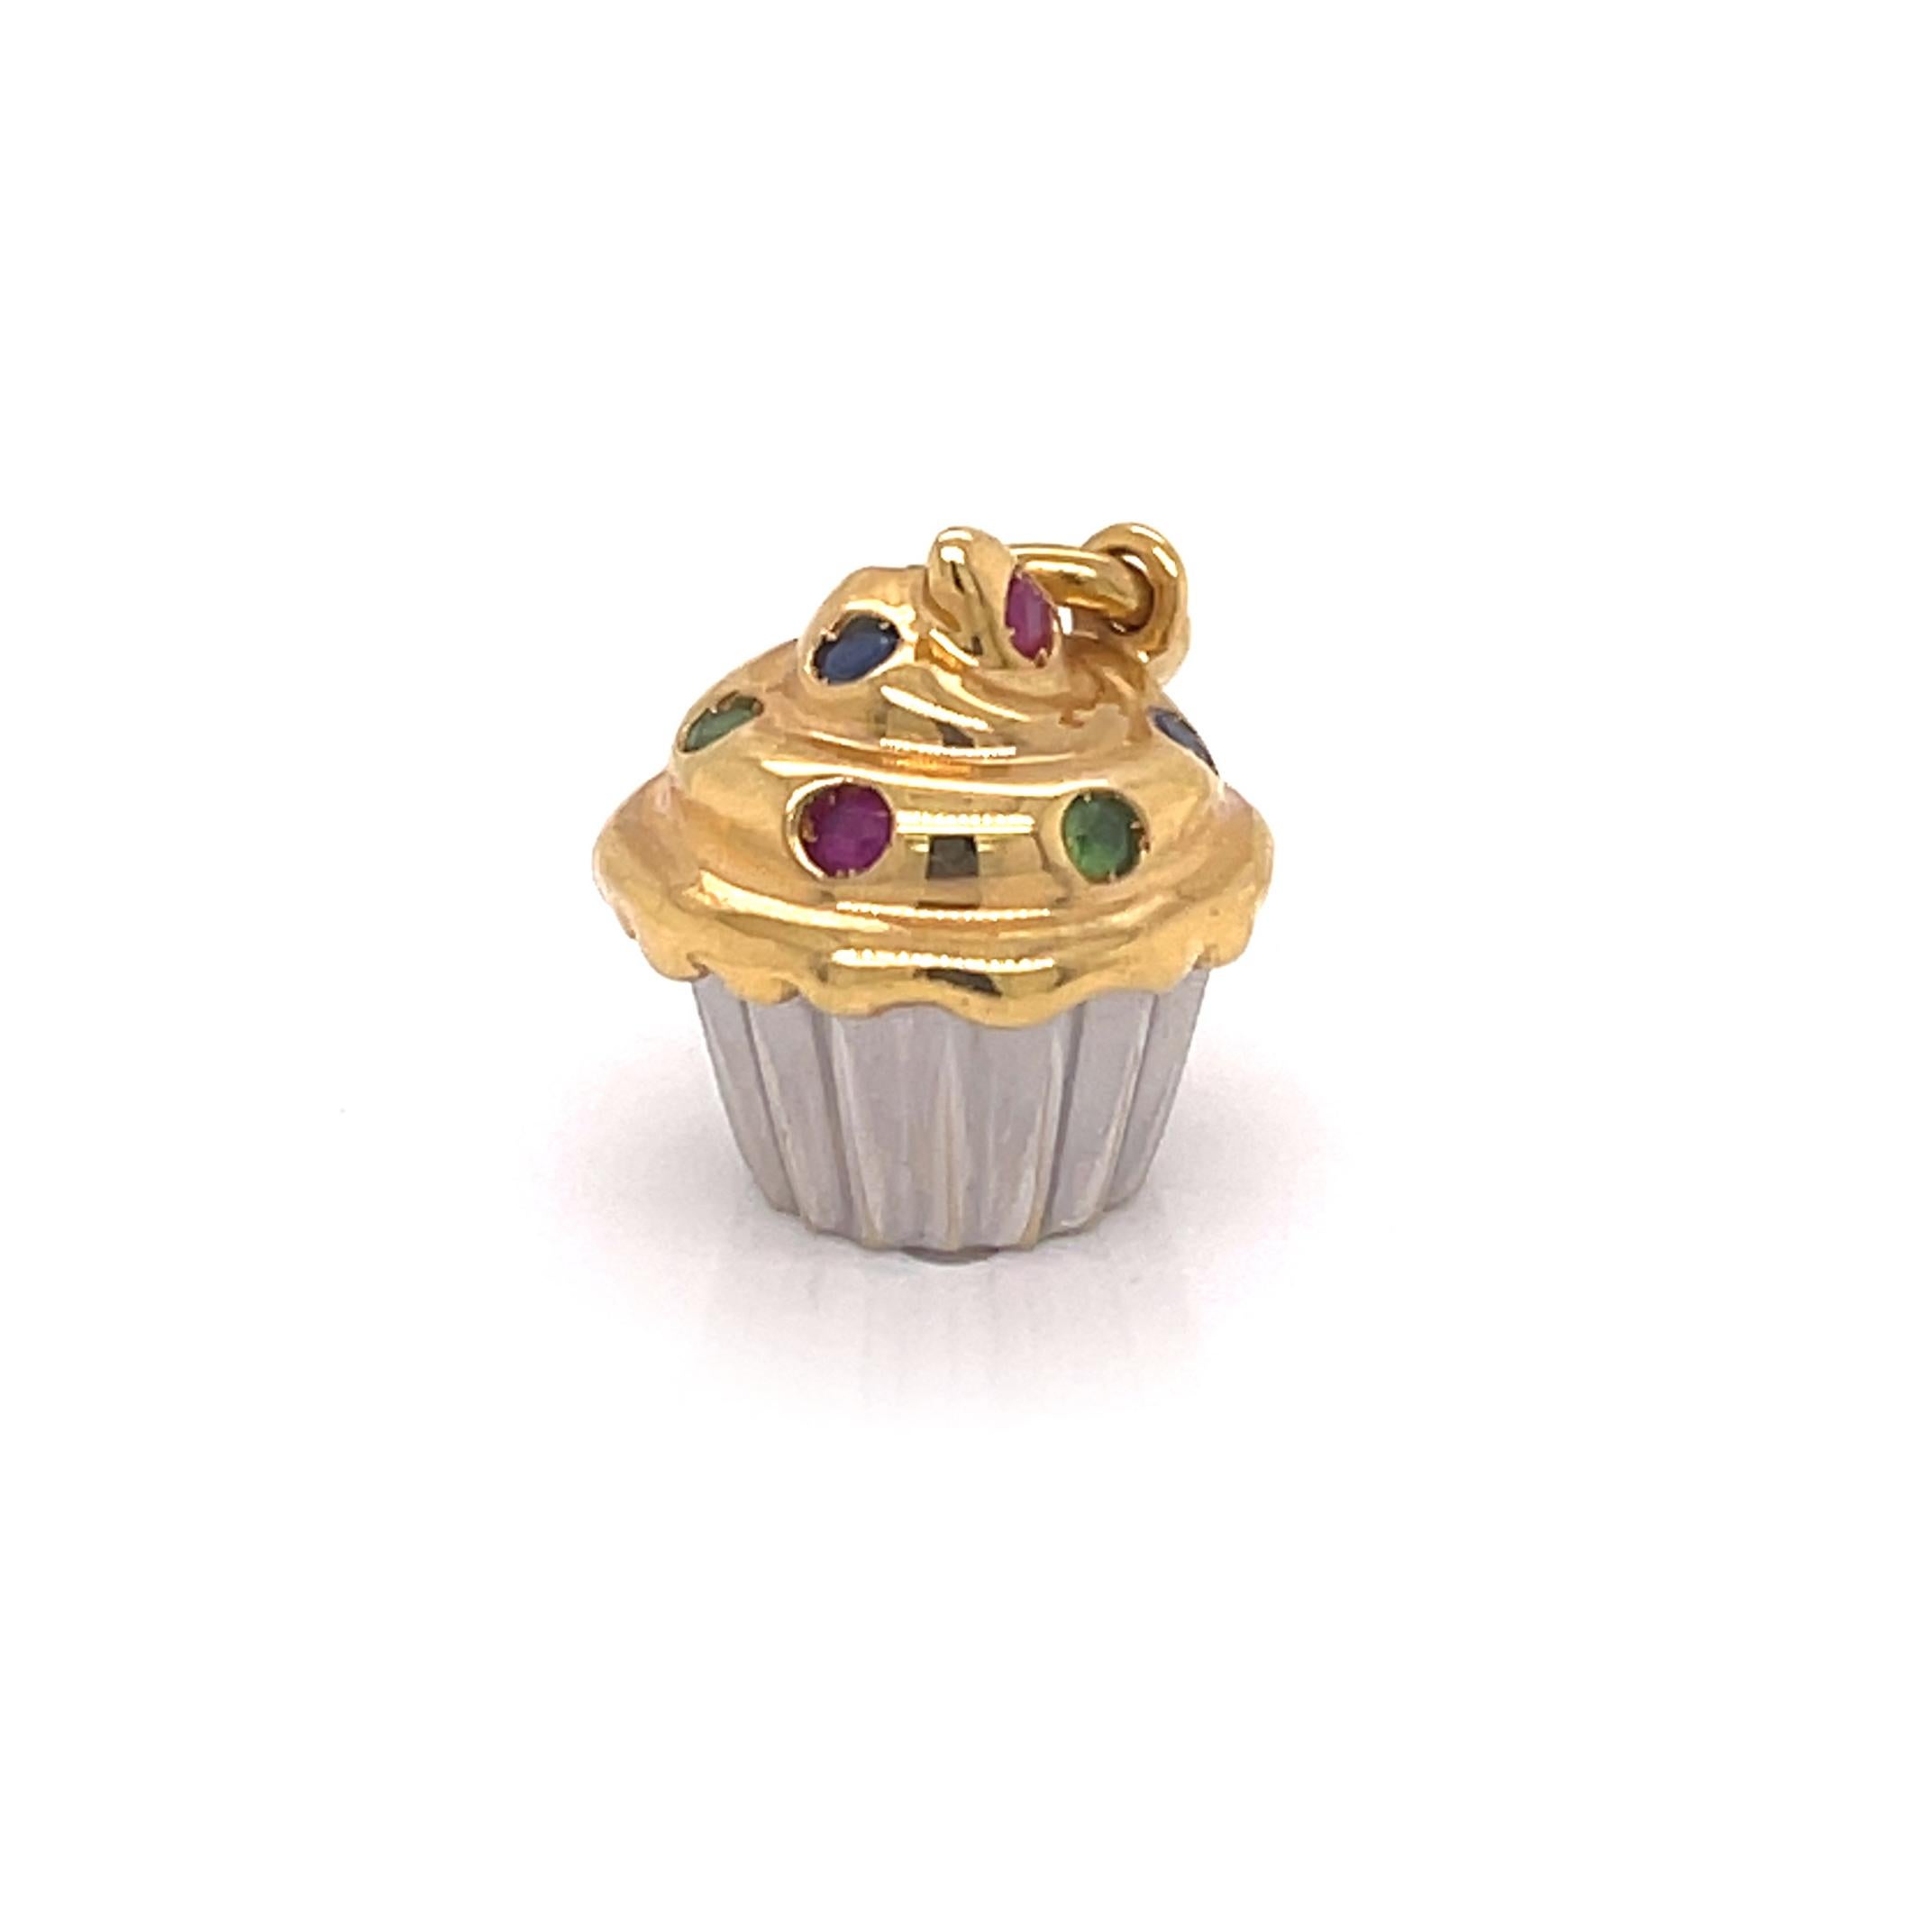 This is an appetizing authentic cupcake charm from Tiffany & Co. It is crafted from 18k yellow and white gold with a polished finish featuring yellow gold frosting at the top with gemstone sprinkles, ruby, sapphire and emerald. The fluted shape cup